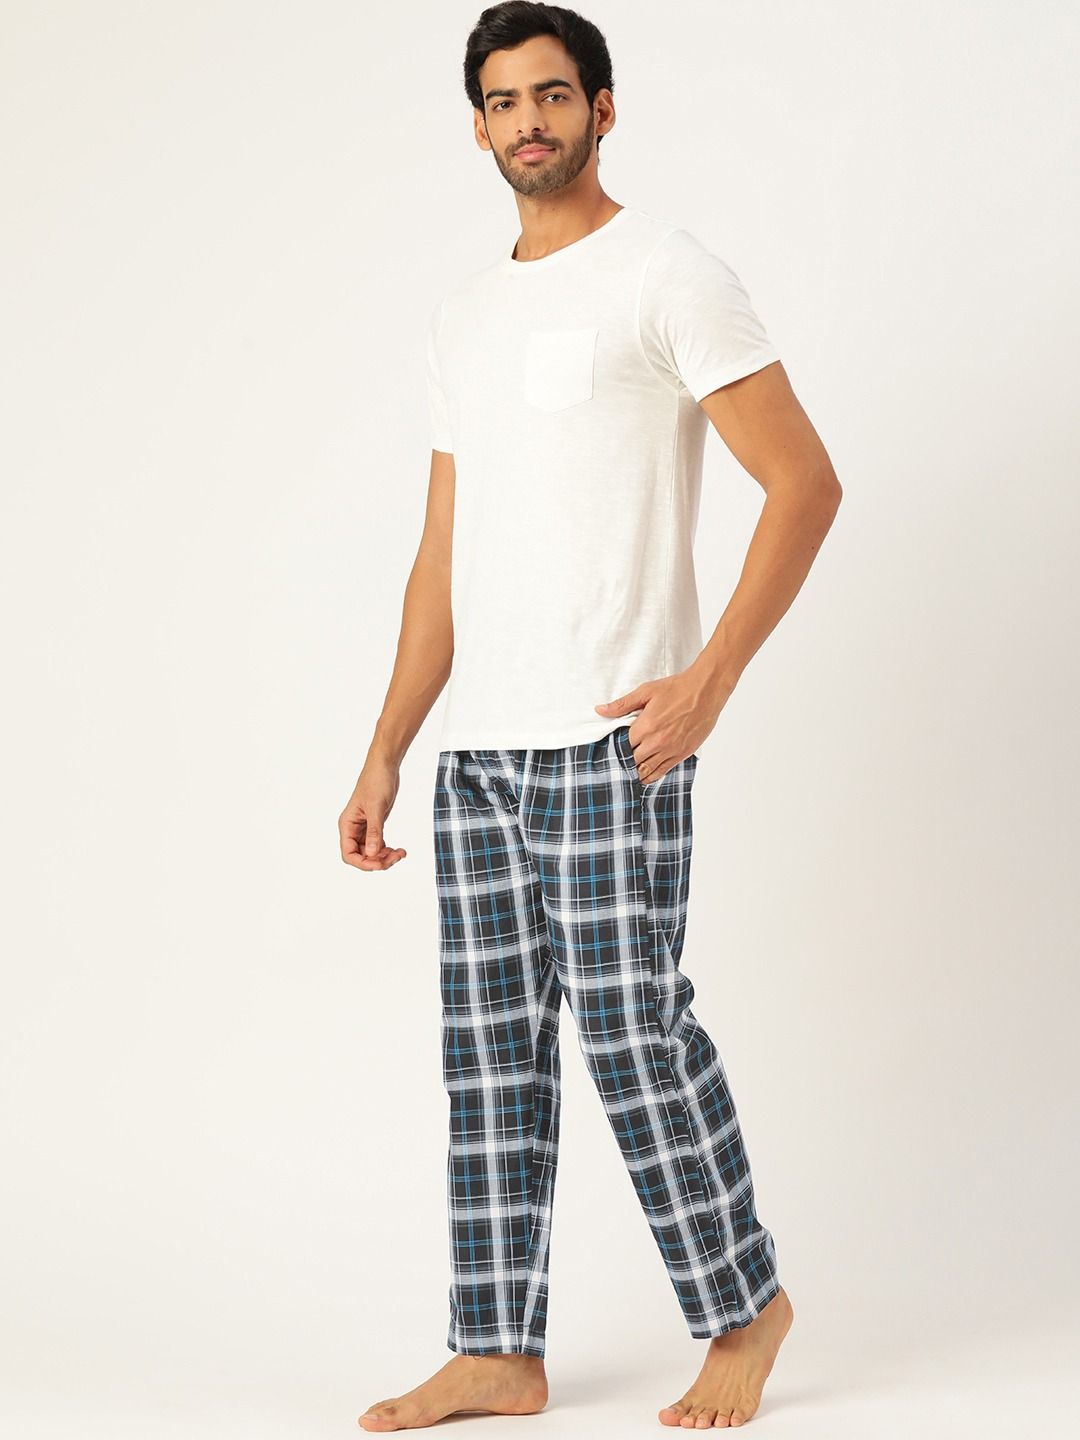 How To Wear Gingham Pants  Gingham outfit Fashion pants Summer pants  outfits